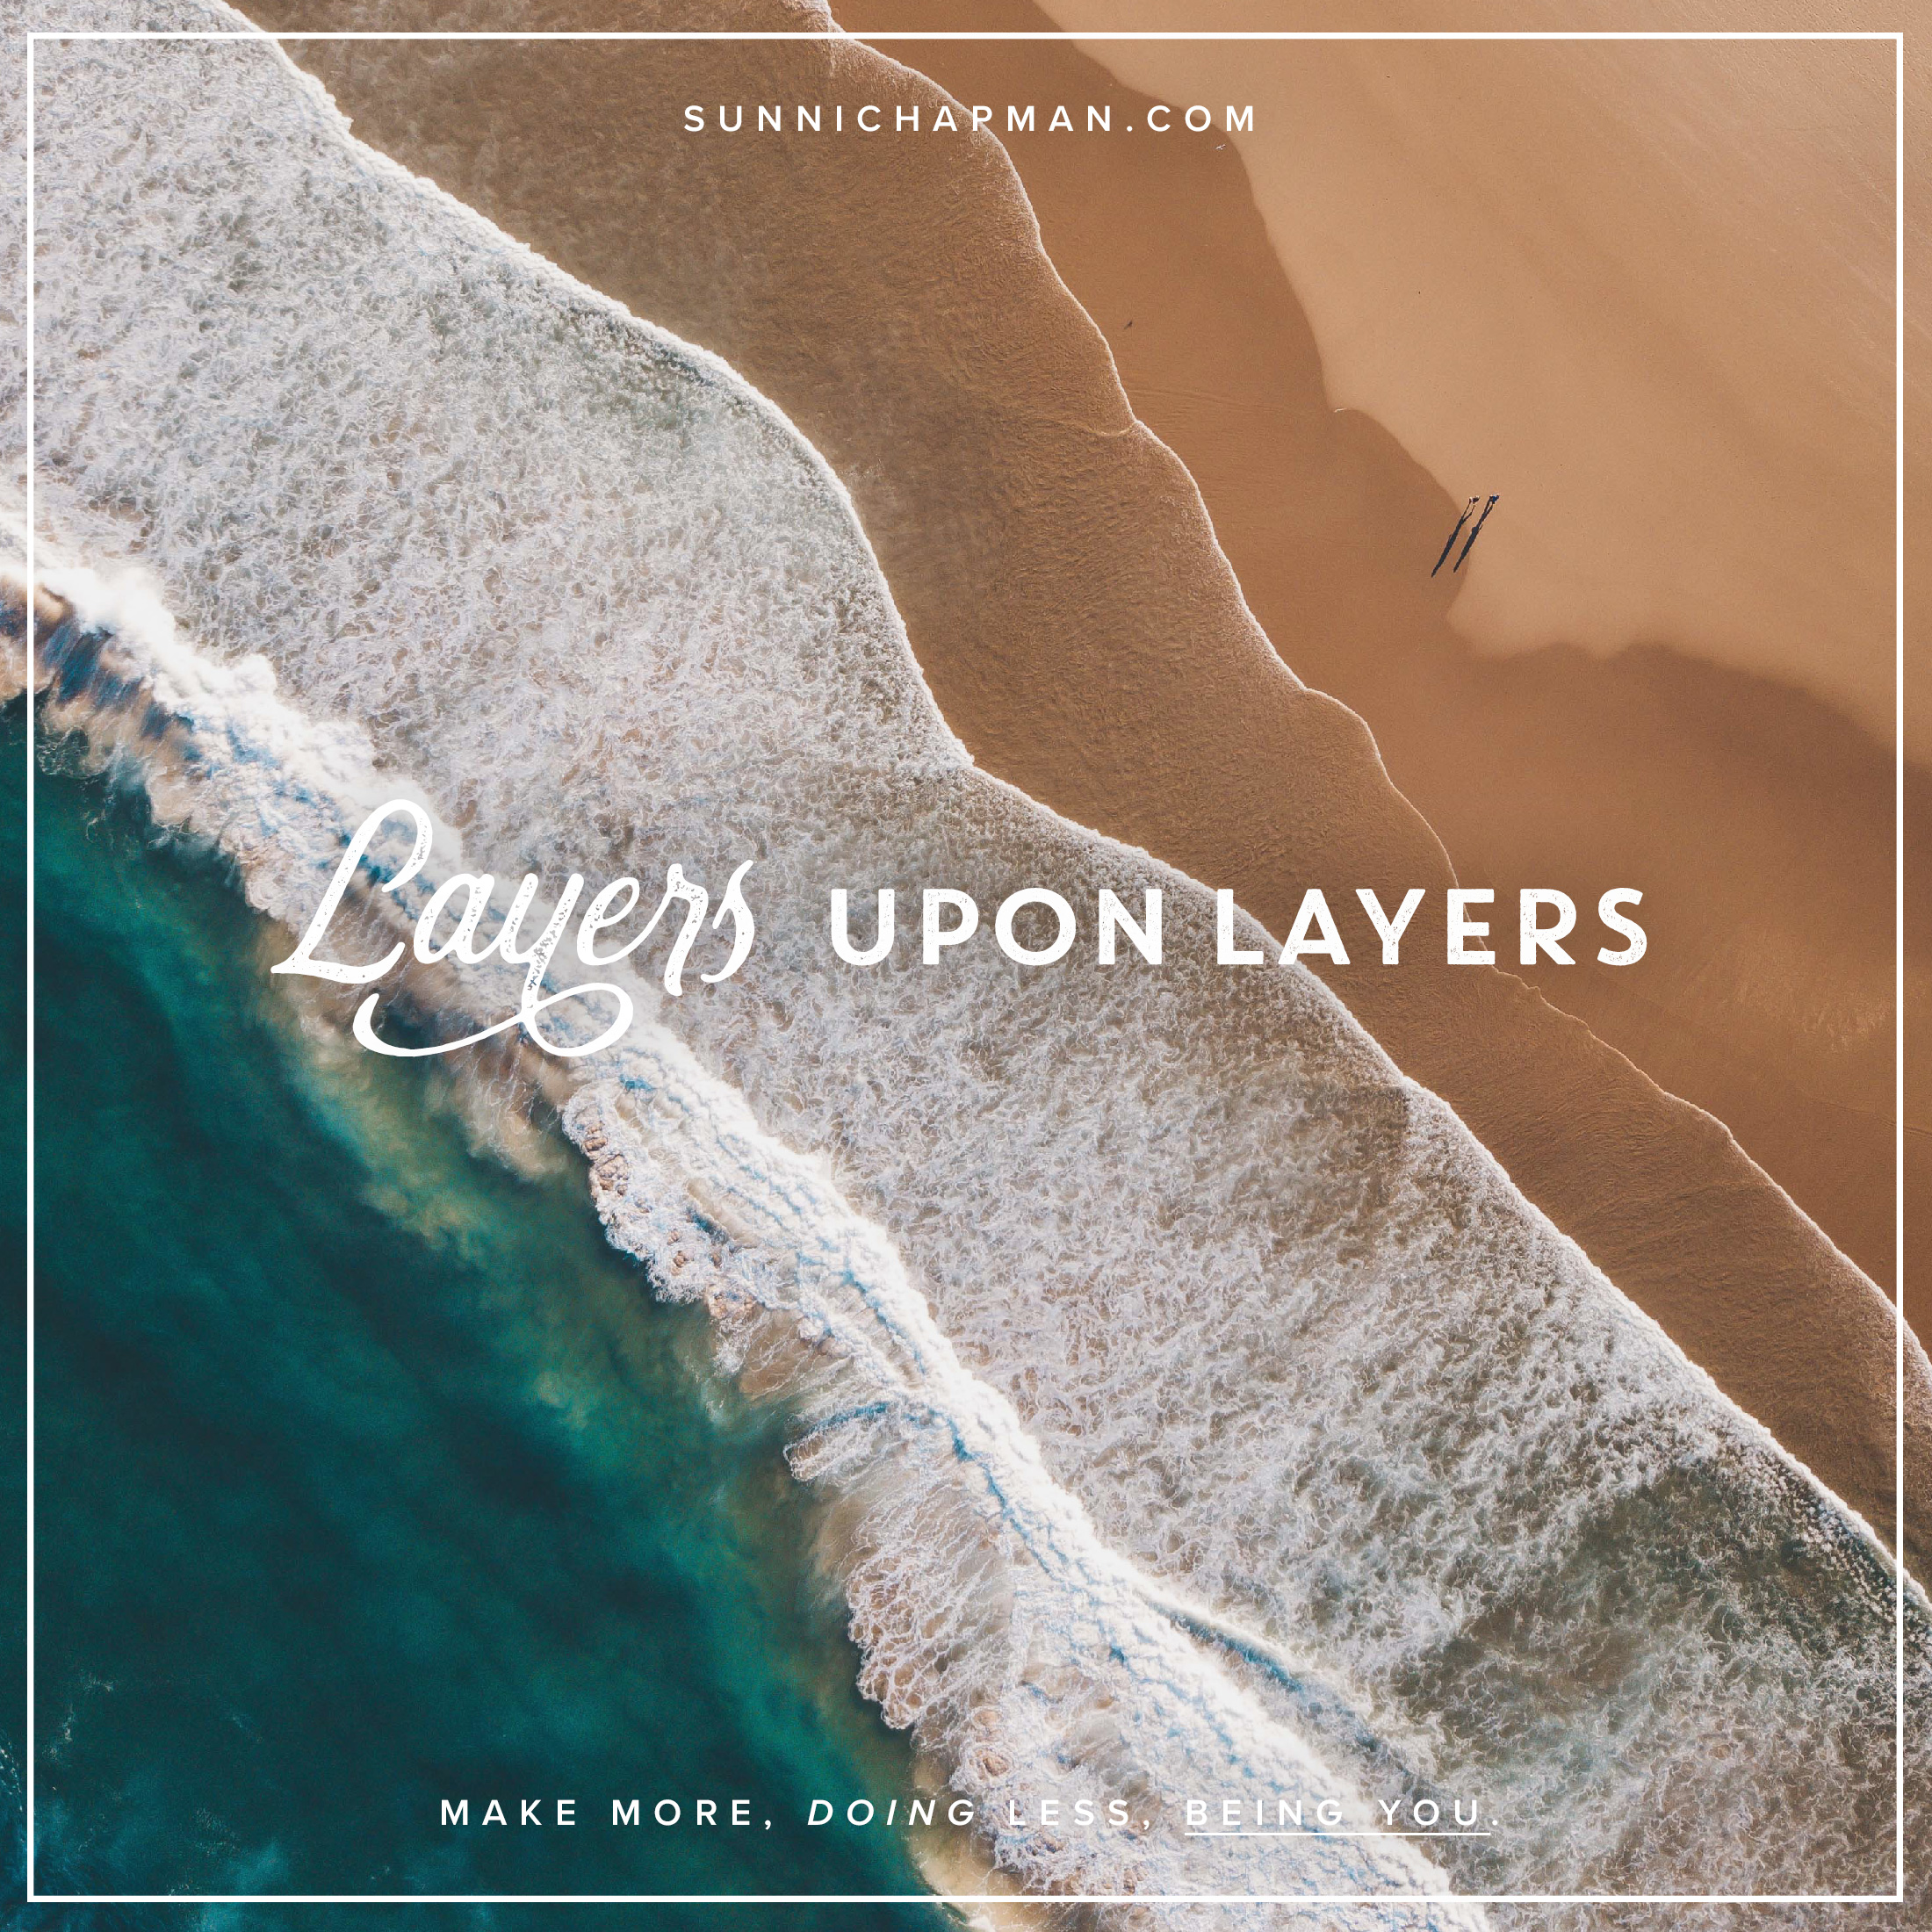 Drone view to sea, waves and sand and text: Layers Upon Layers